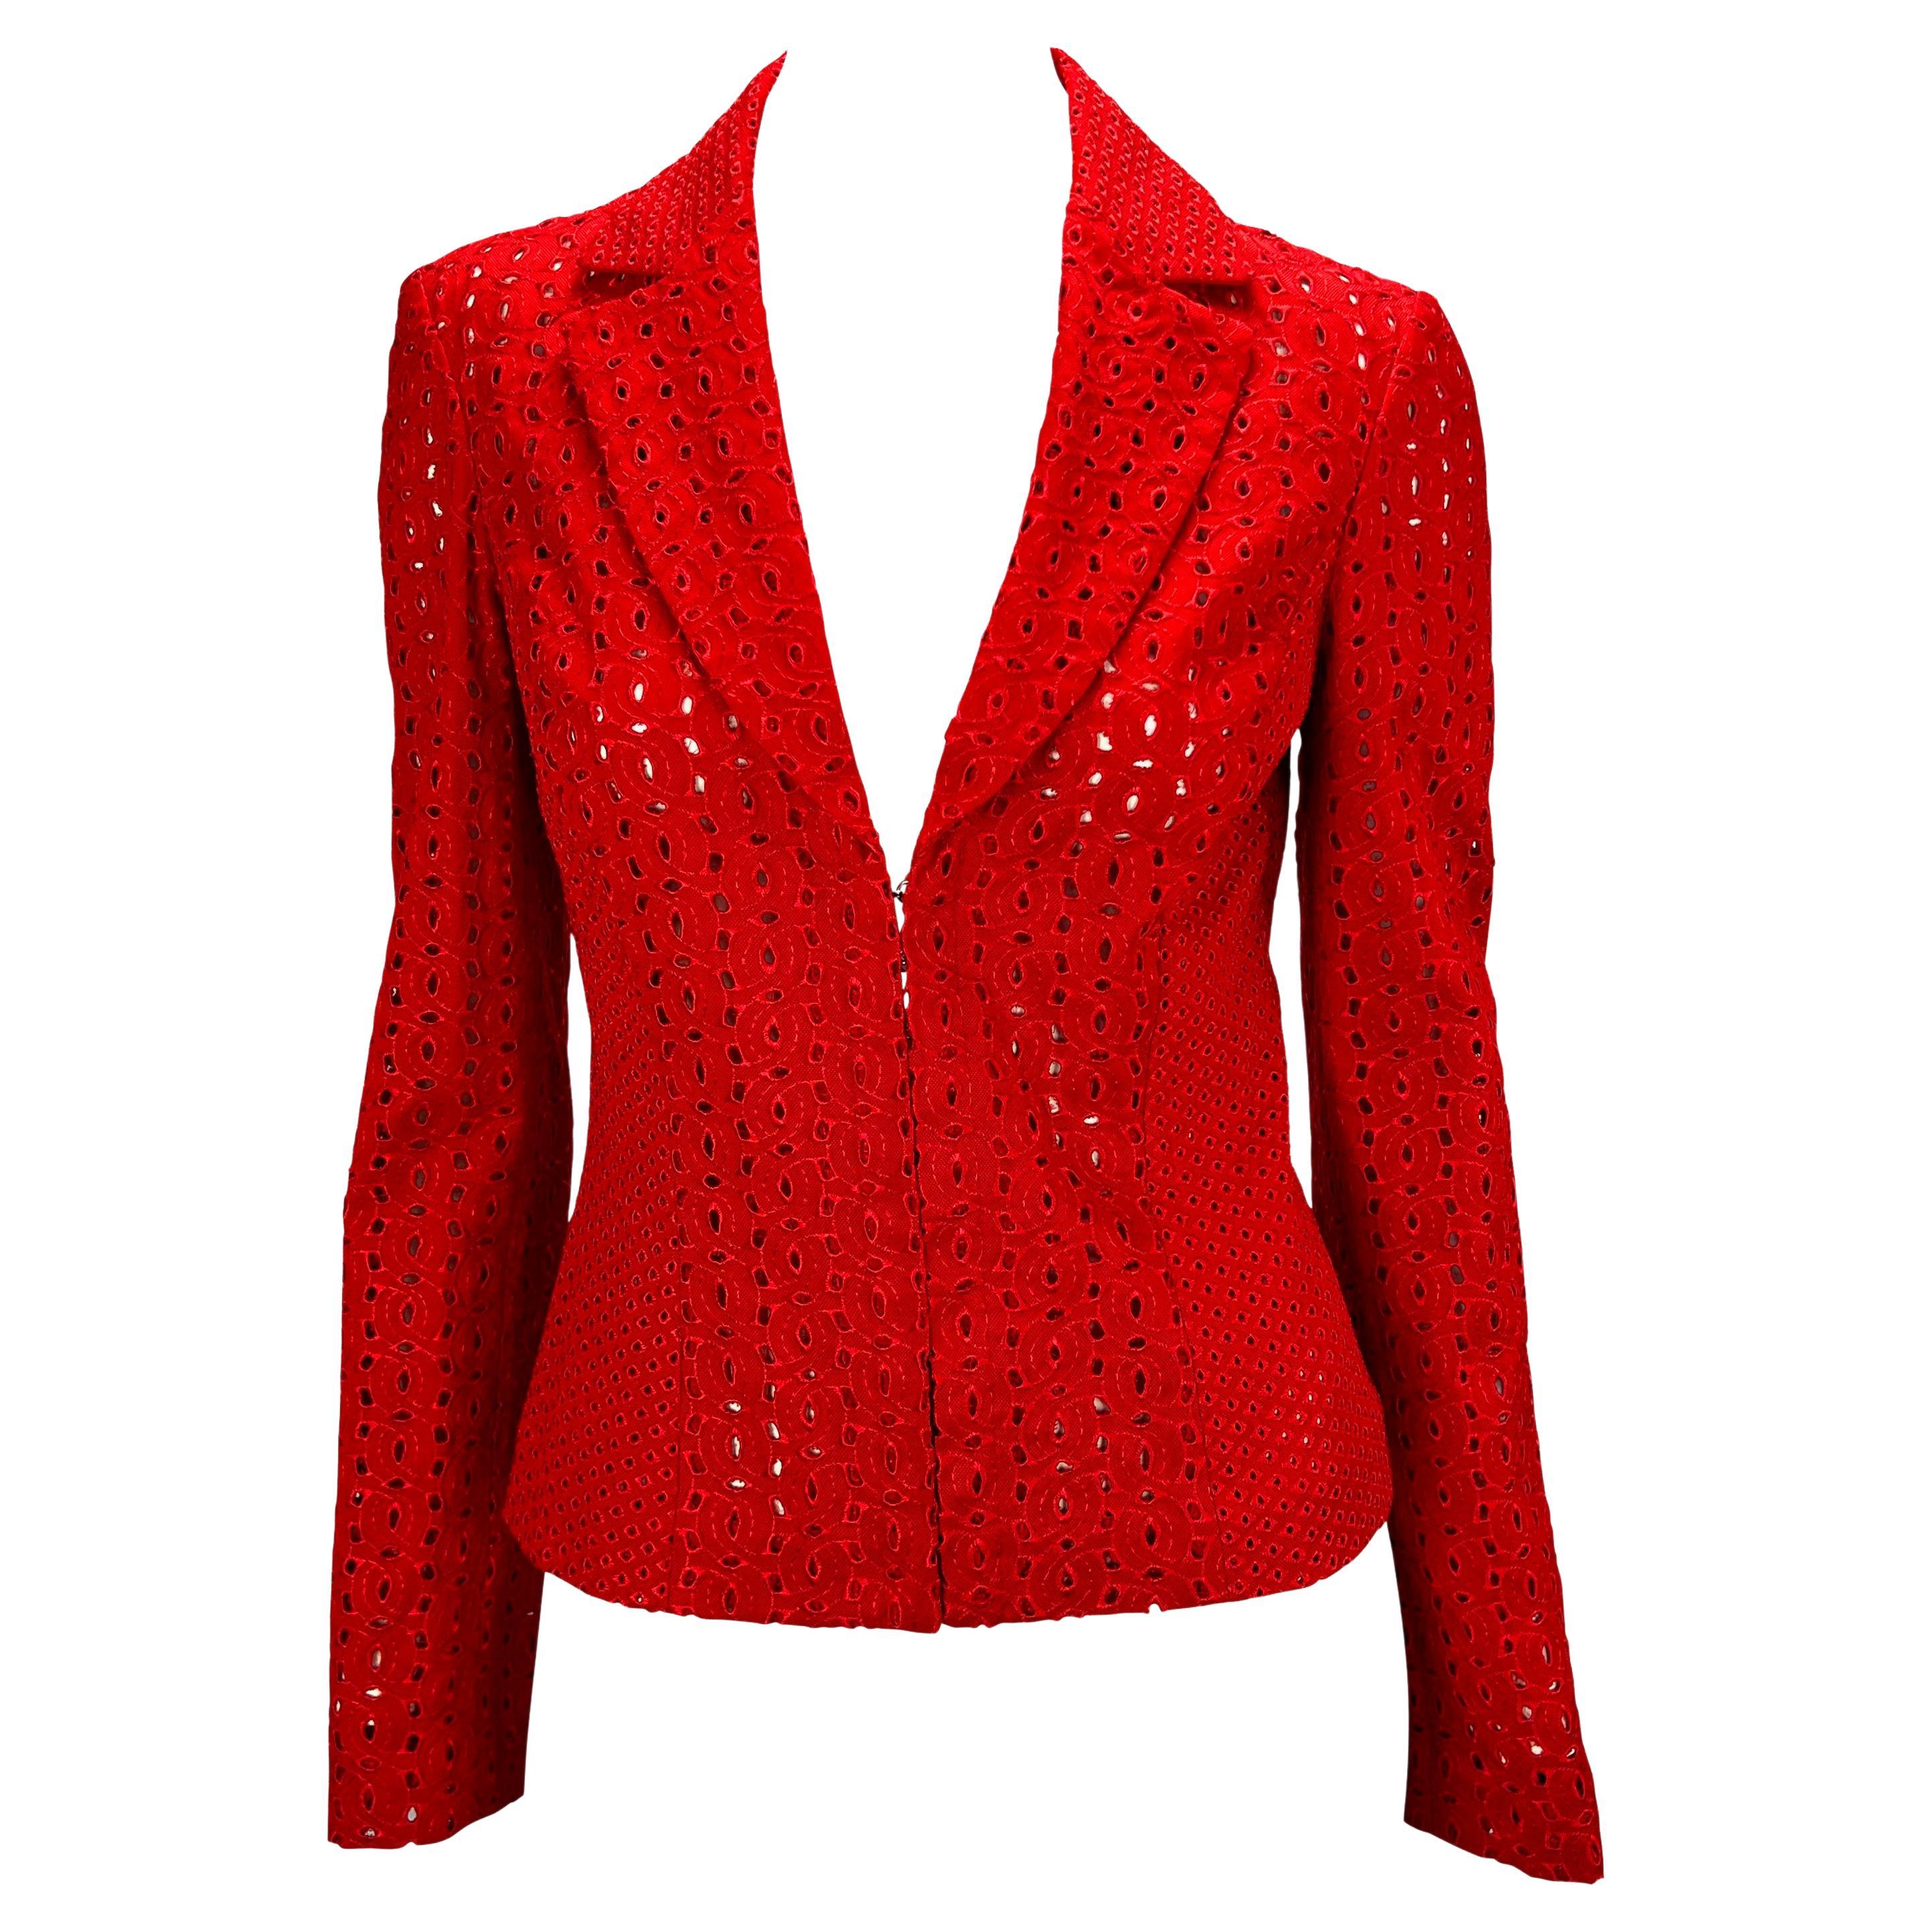 S/S 2002 Gianni Versace by Donatella Eyelet Cutout Red Sheer Blazer For Sale